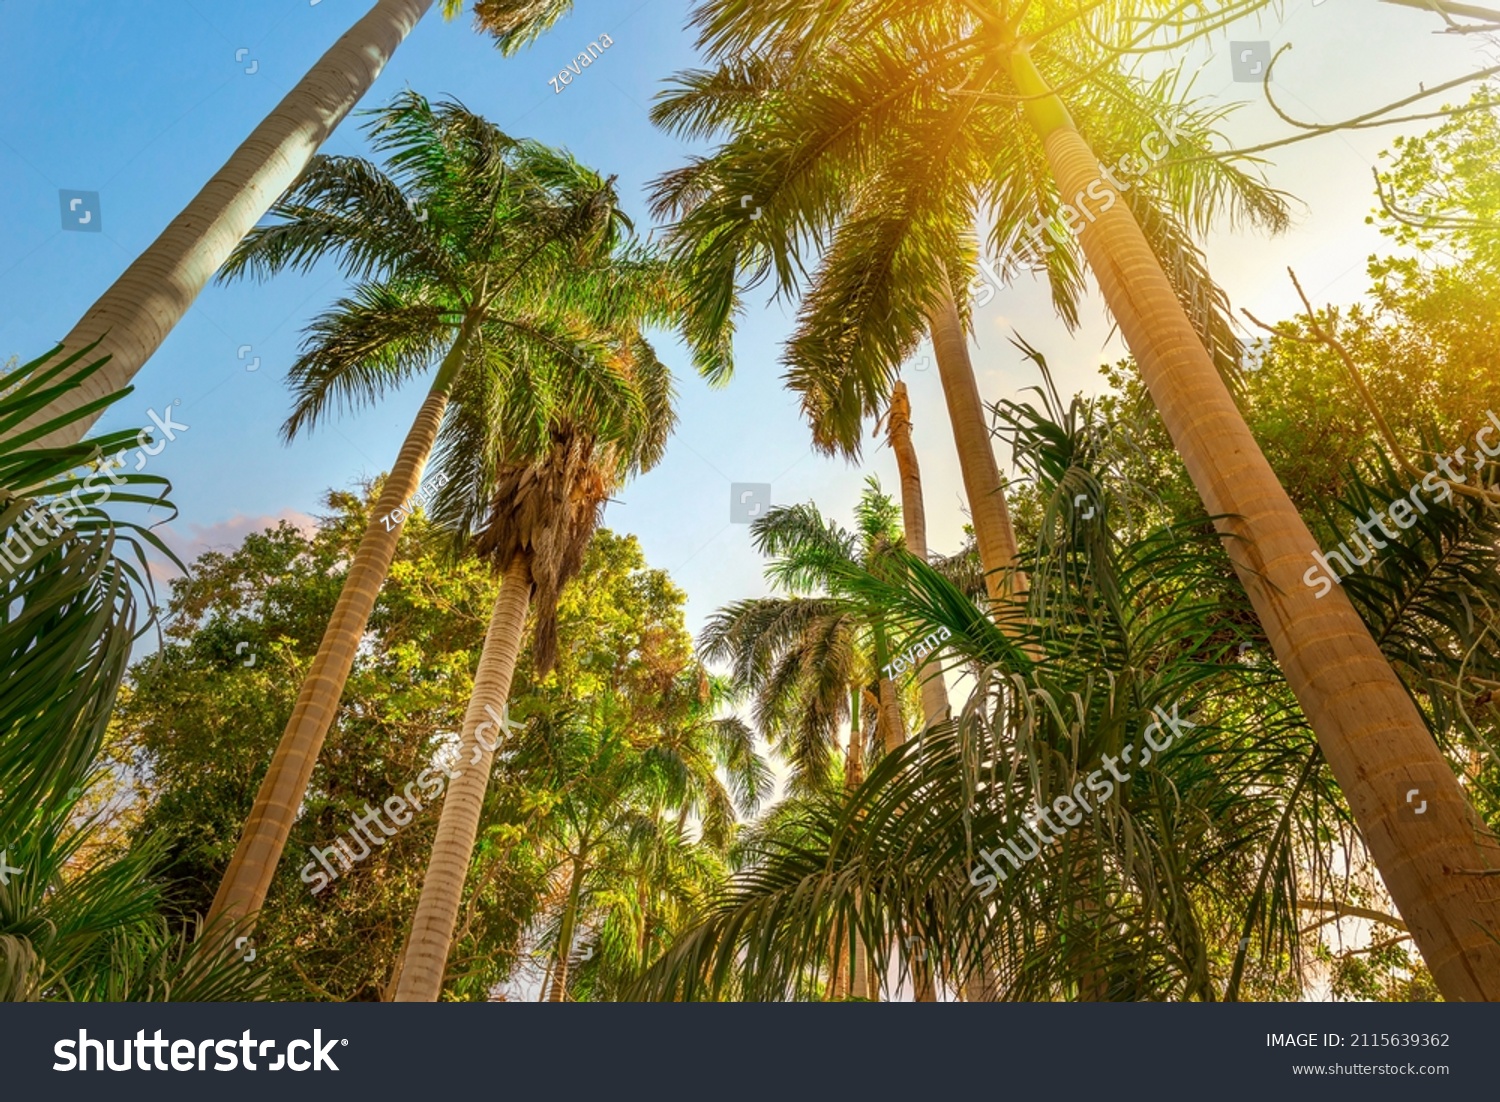 Palm trees and bright sun in Botanical Garden of Aswan, Egypt #2115639362